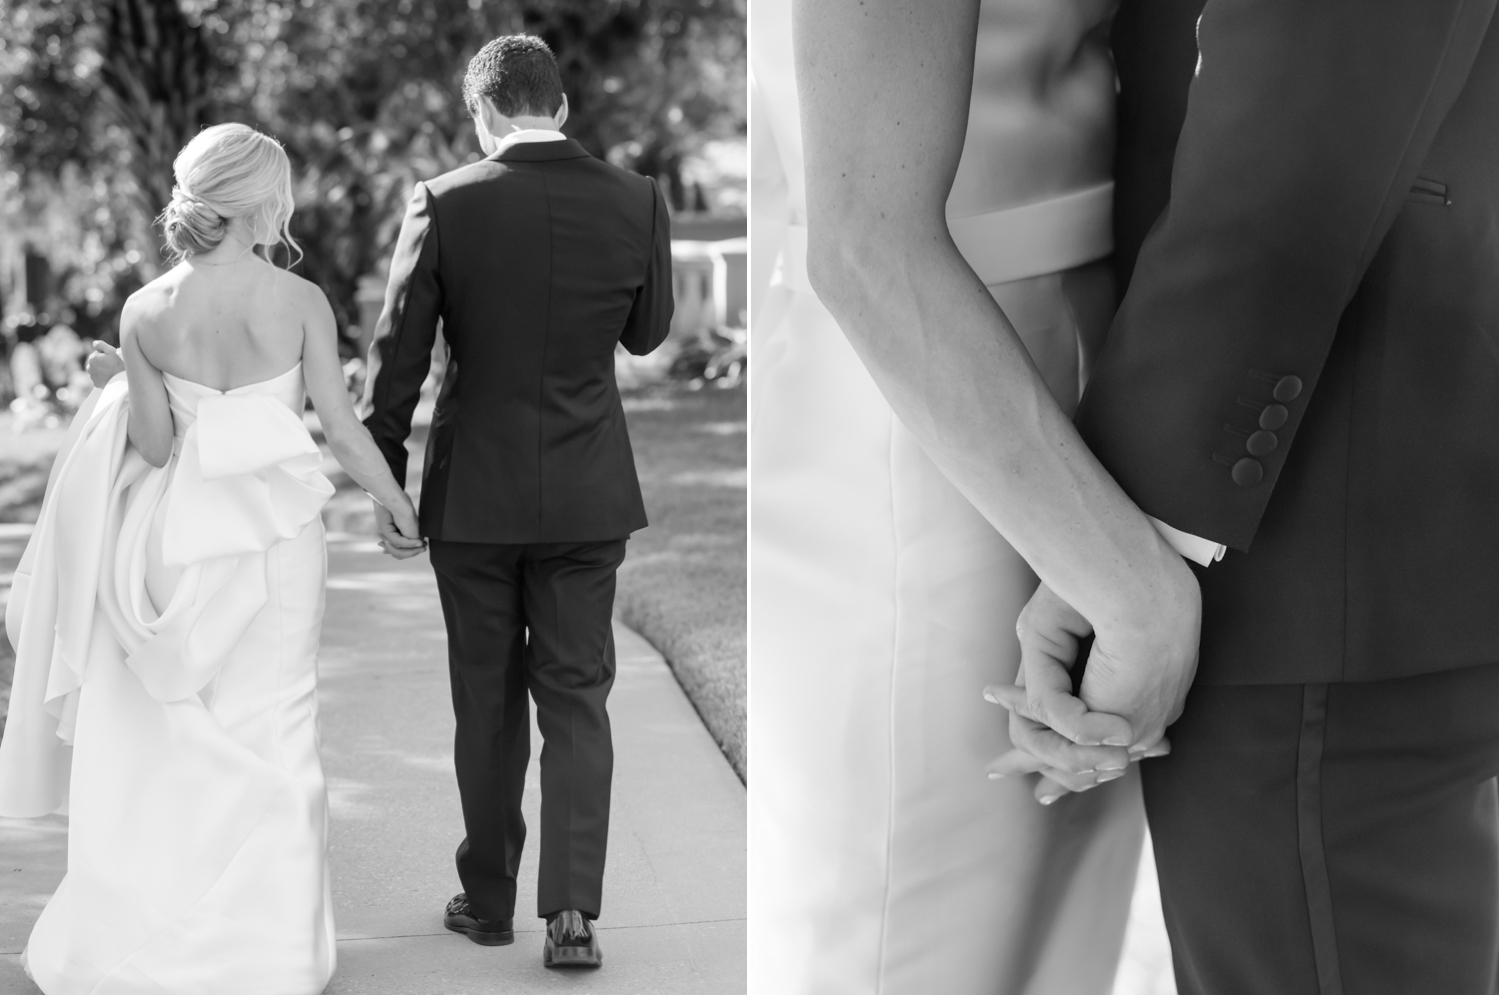 Left: Bride and groom hold hands and walk together. Right: A close up shot of the bride and groom holding hands